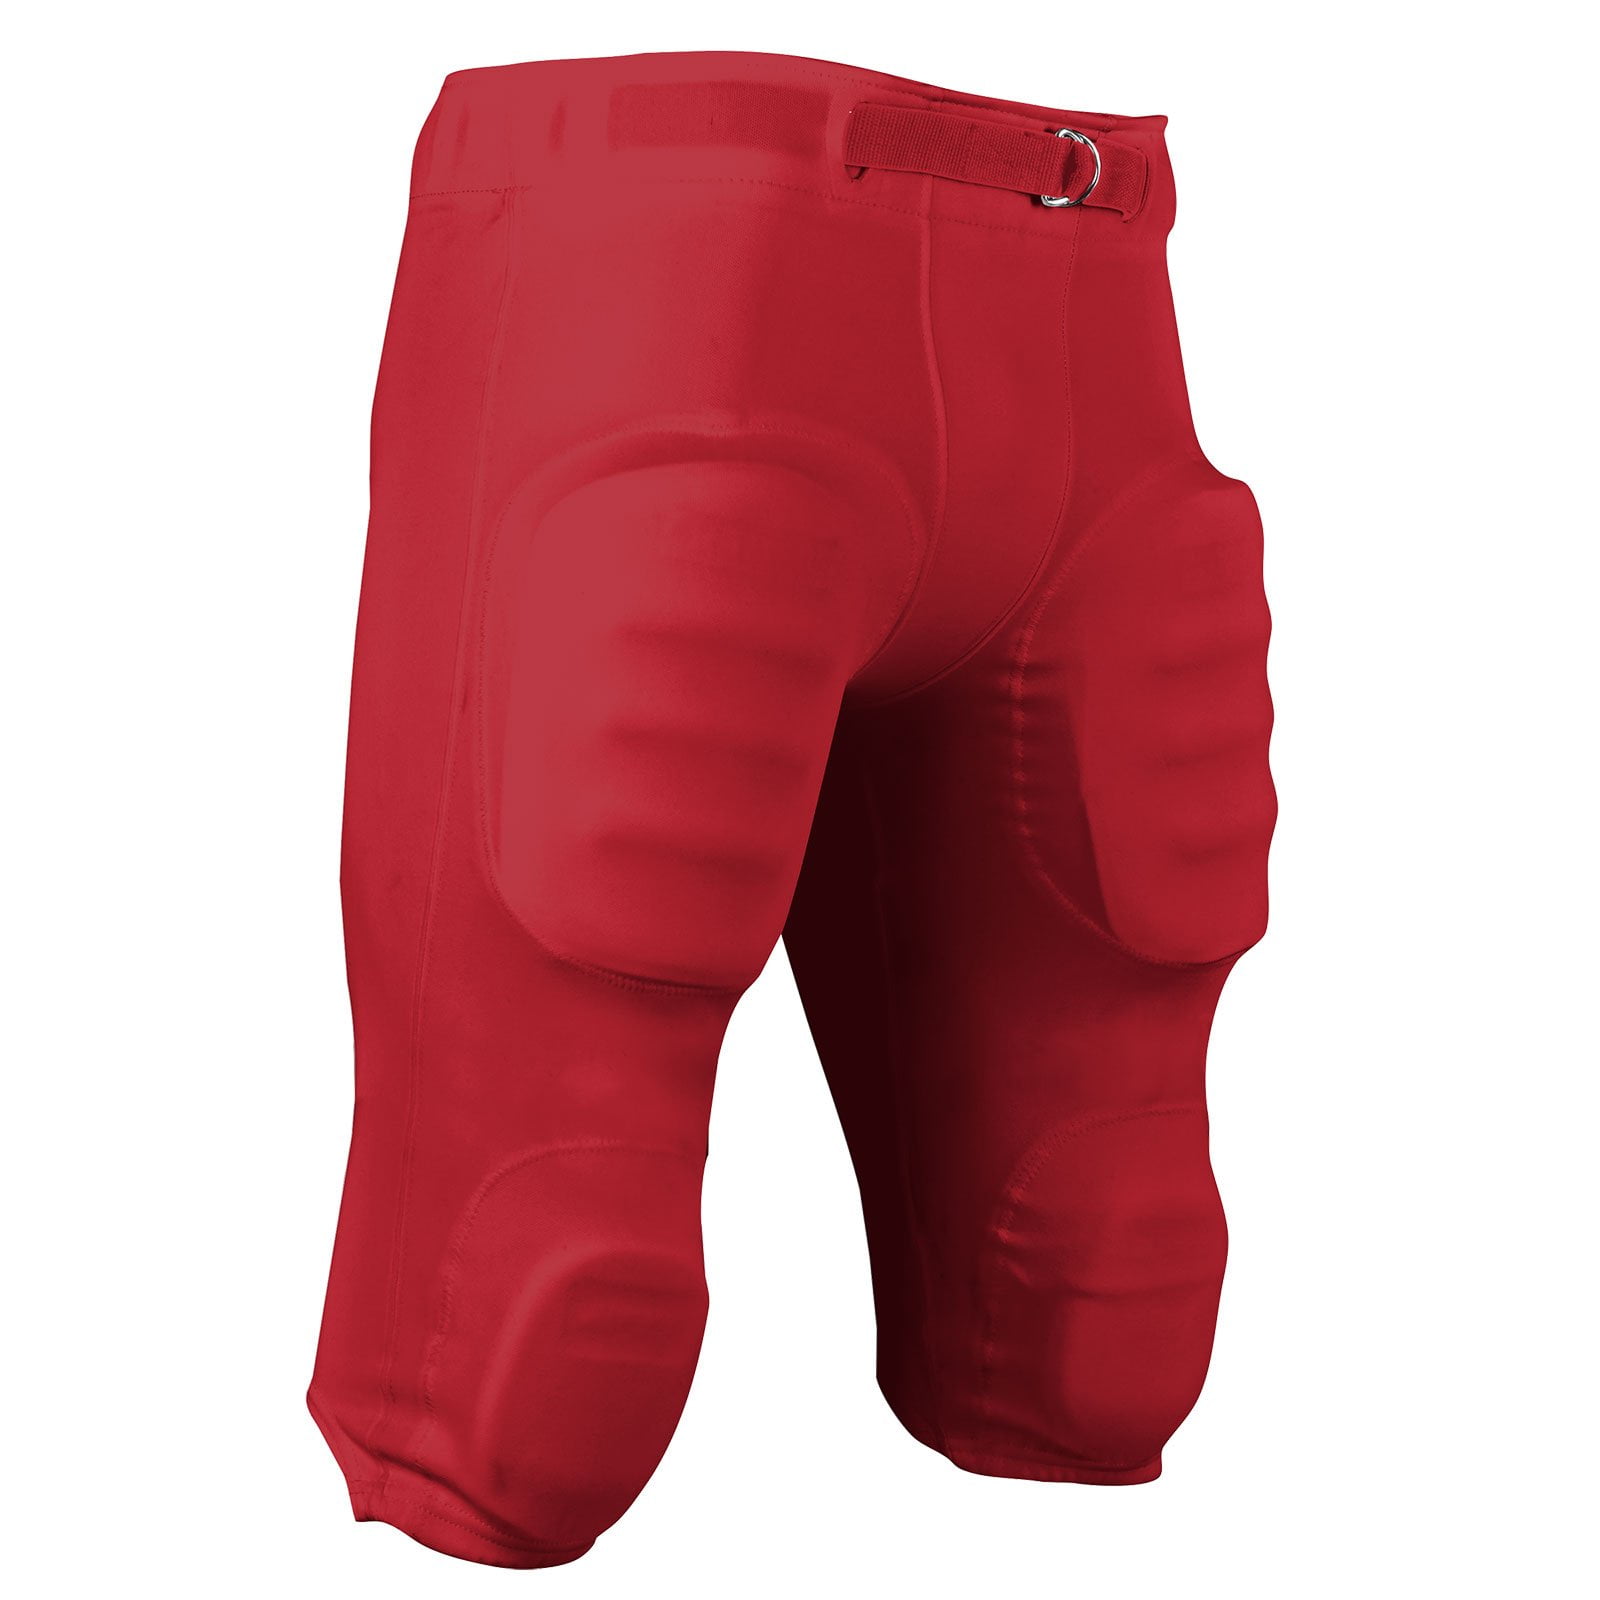 Martin New Adult Football Dazzle Game Pants w Integrated 7 Piece Pad Set Red 